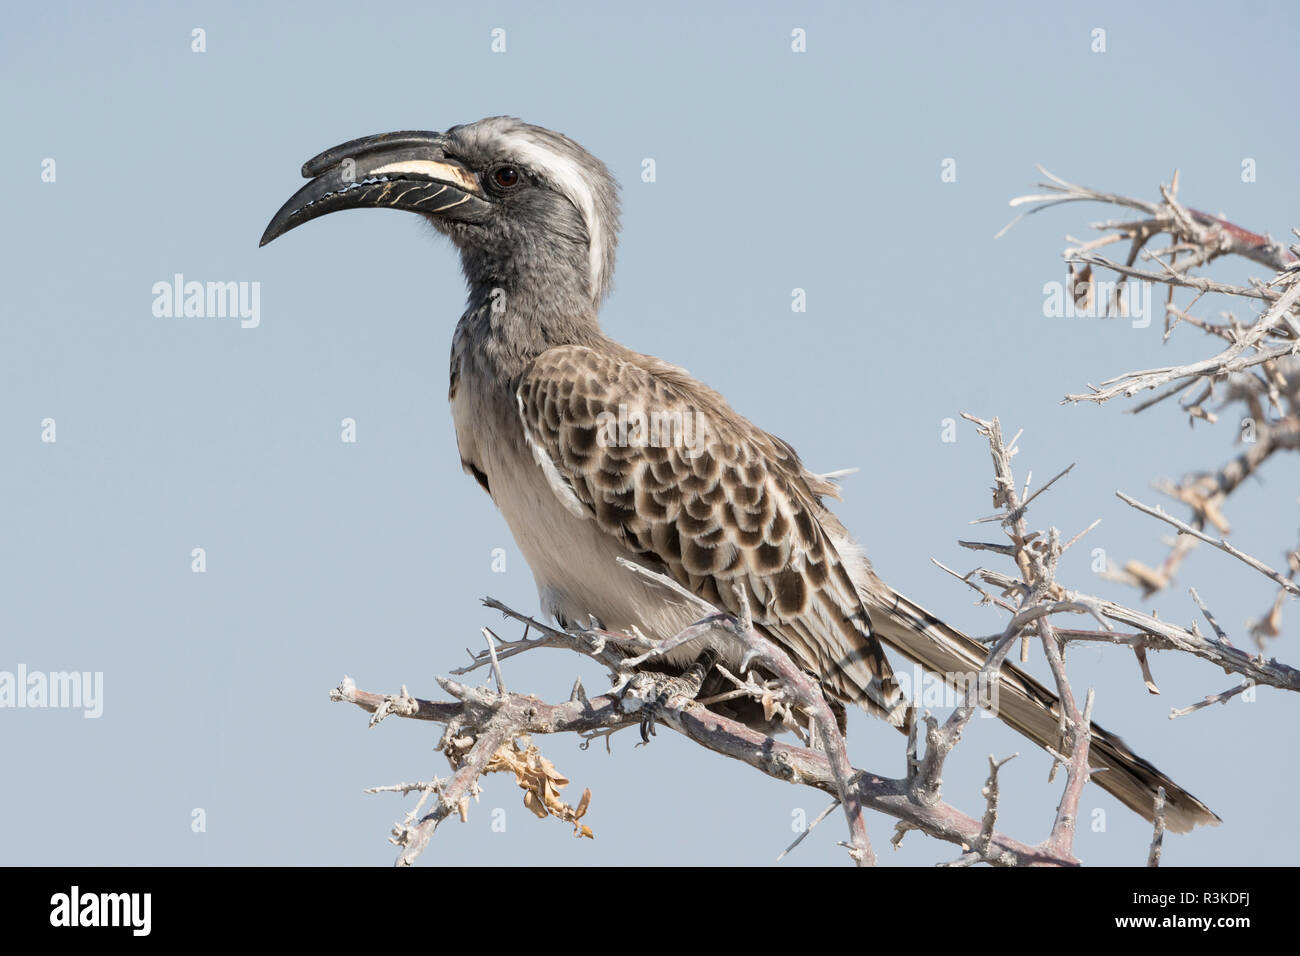 African Gray Hornbill, Tockus nasutus, perched in a tree, Namibia. Stock Photo